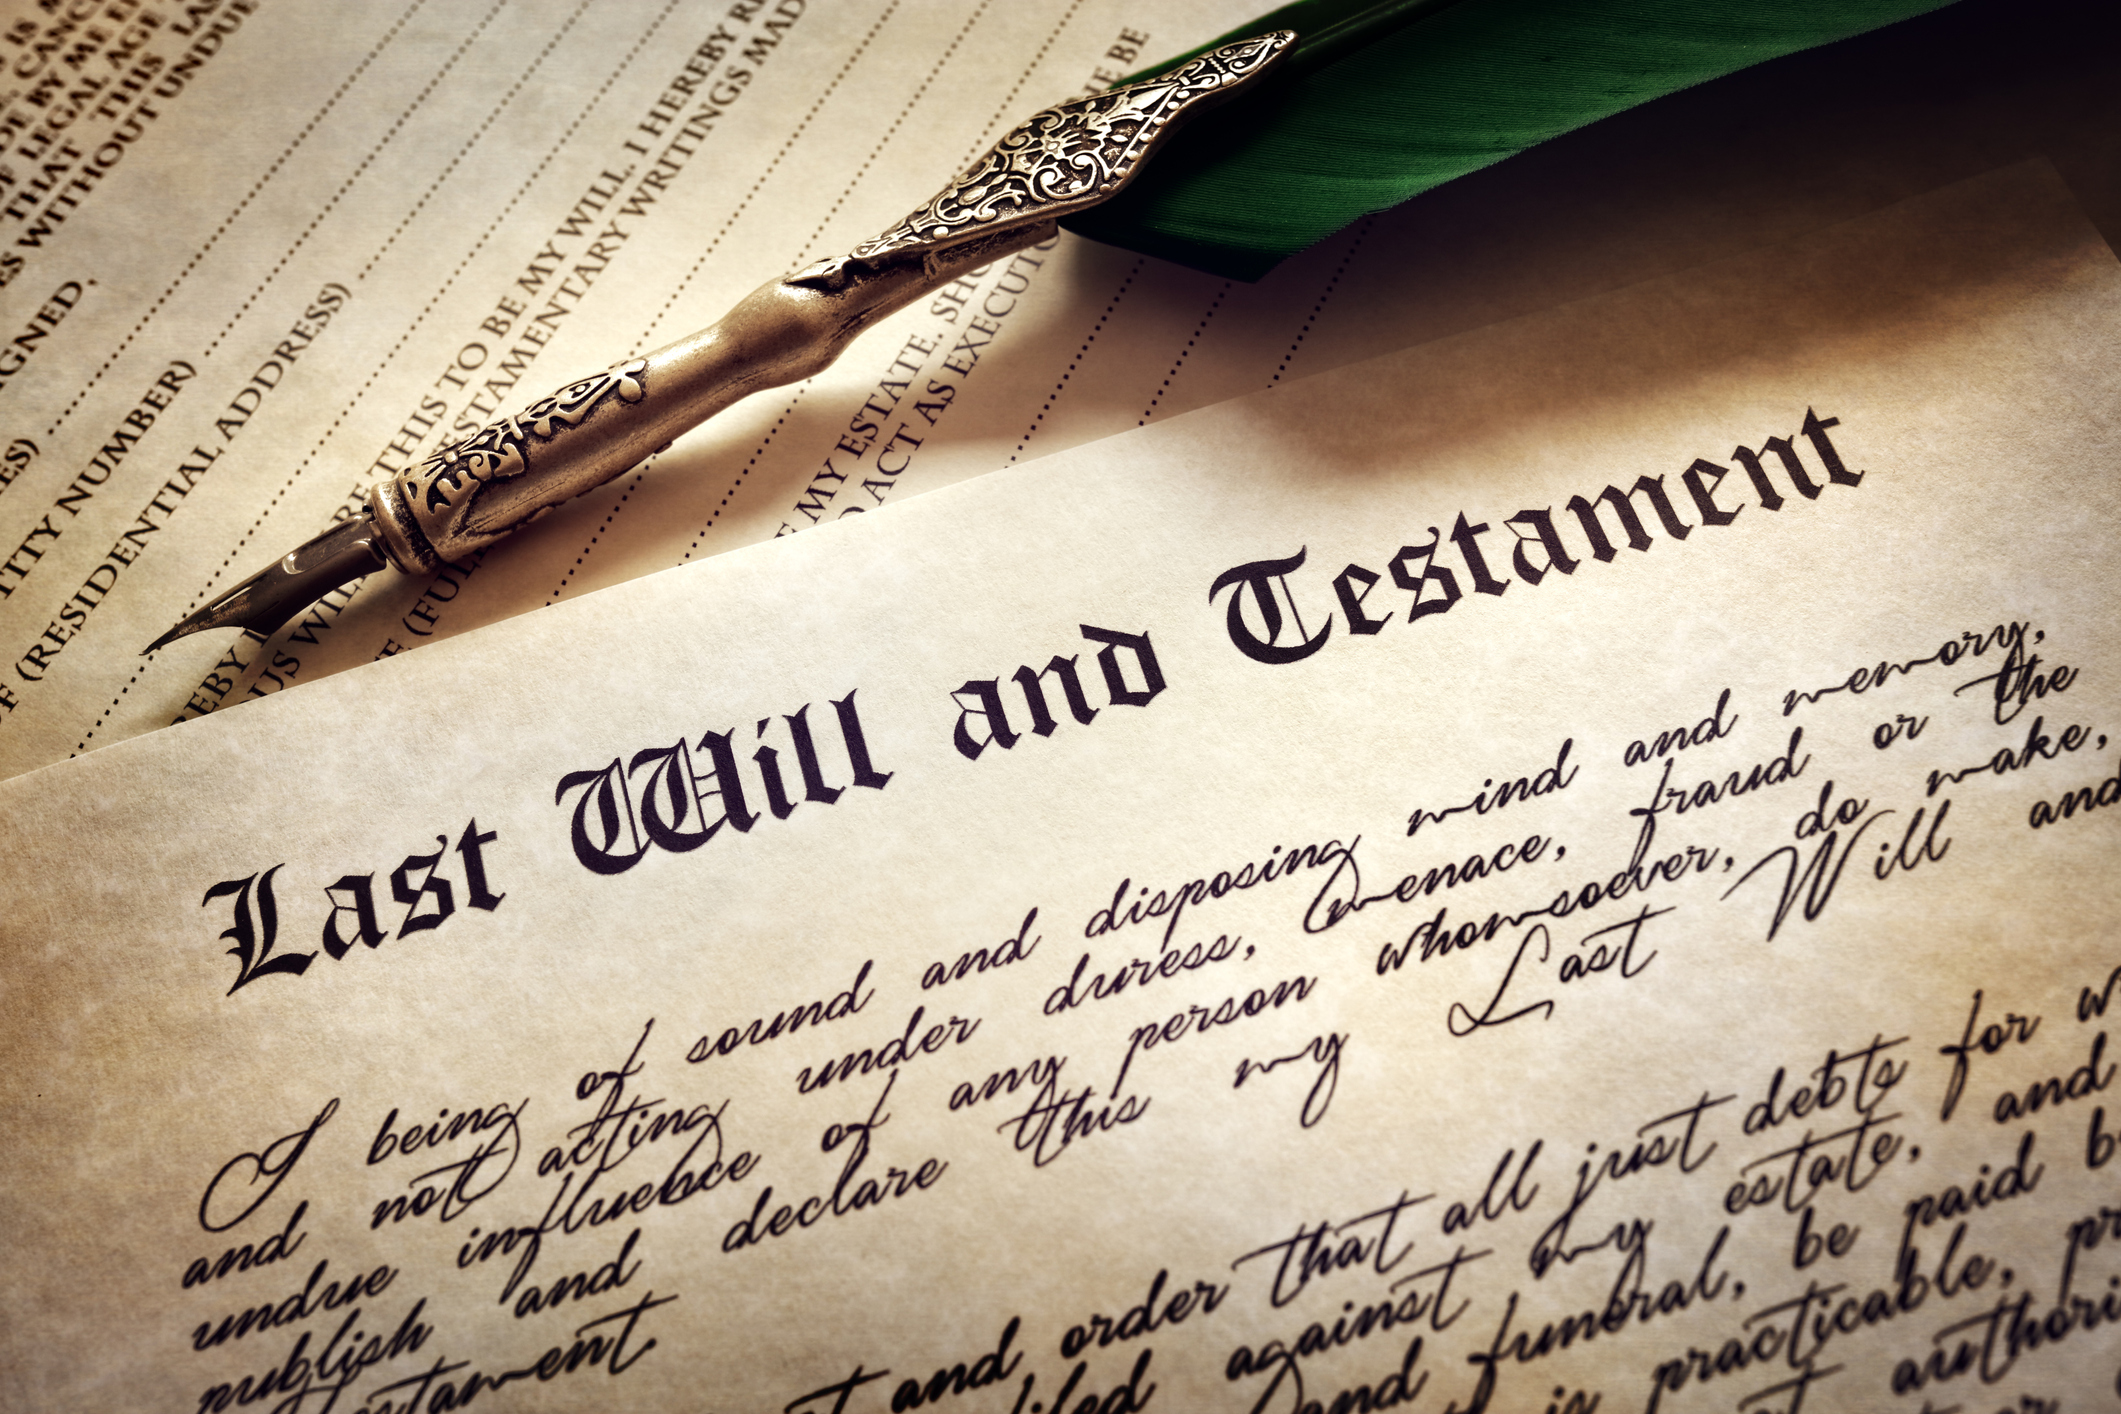 My Loved One Died Without a Will. What Now?